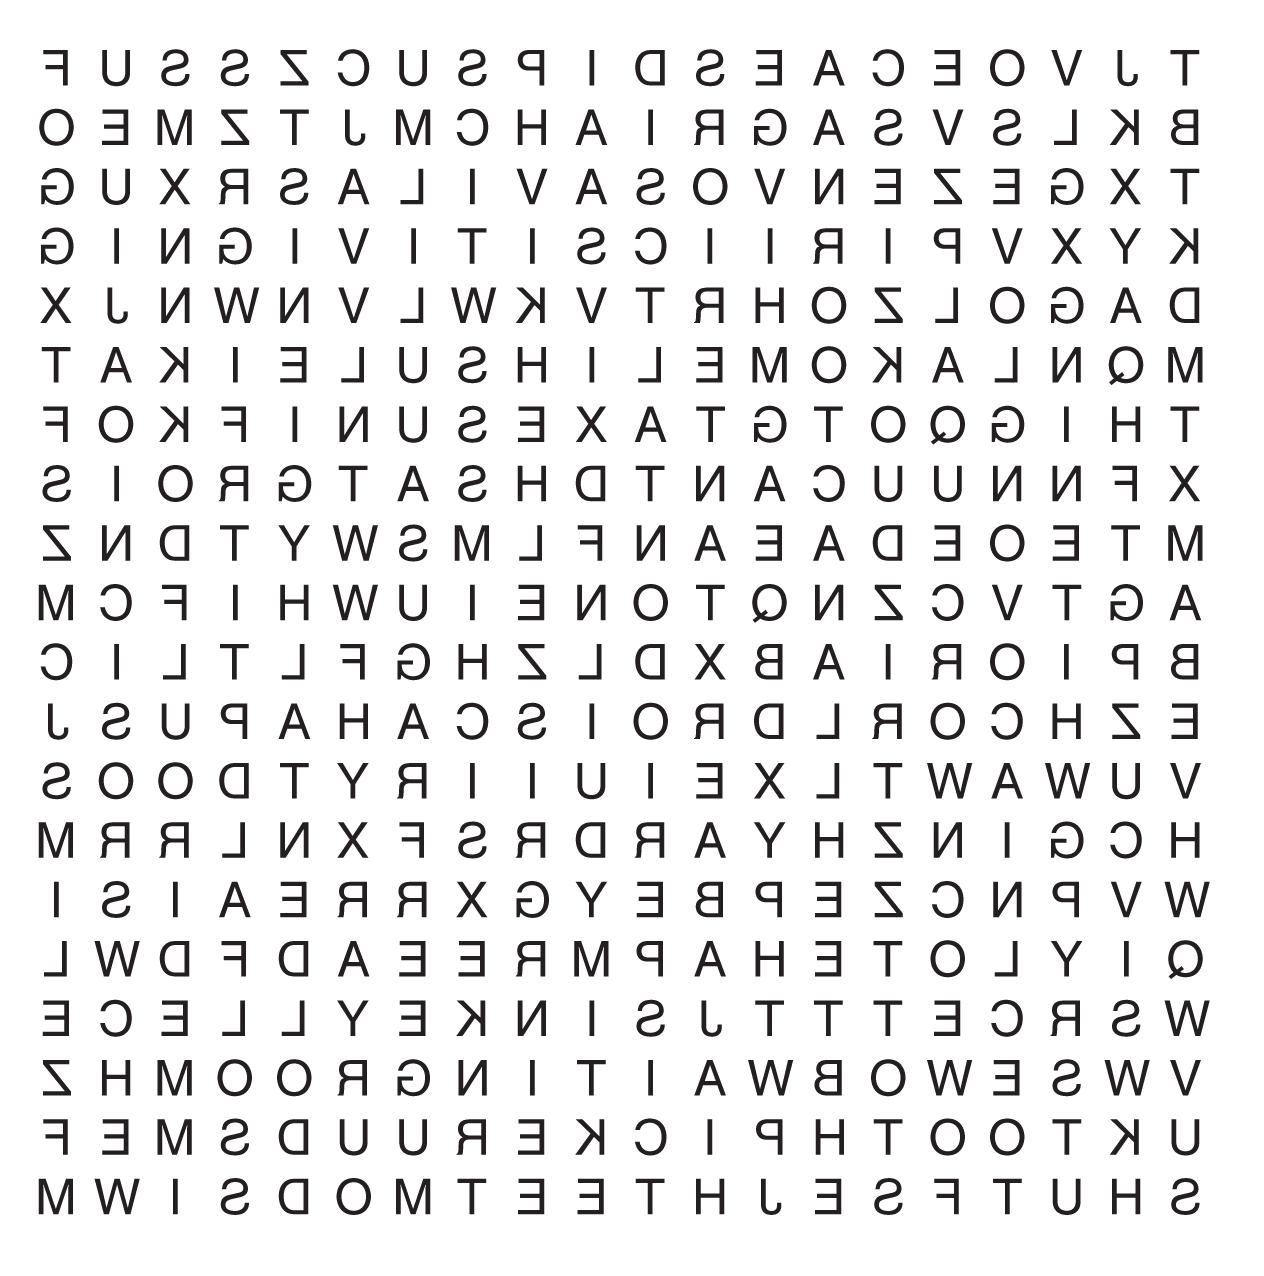 Book of Word Searches